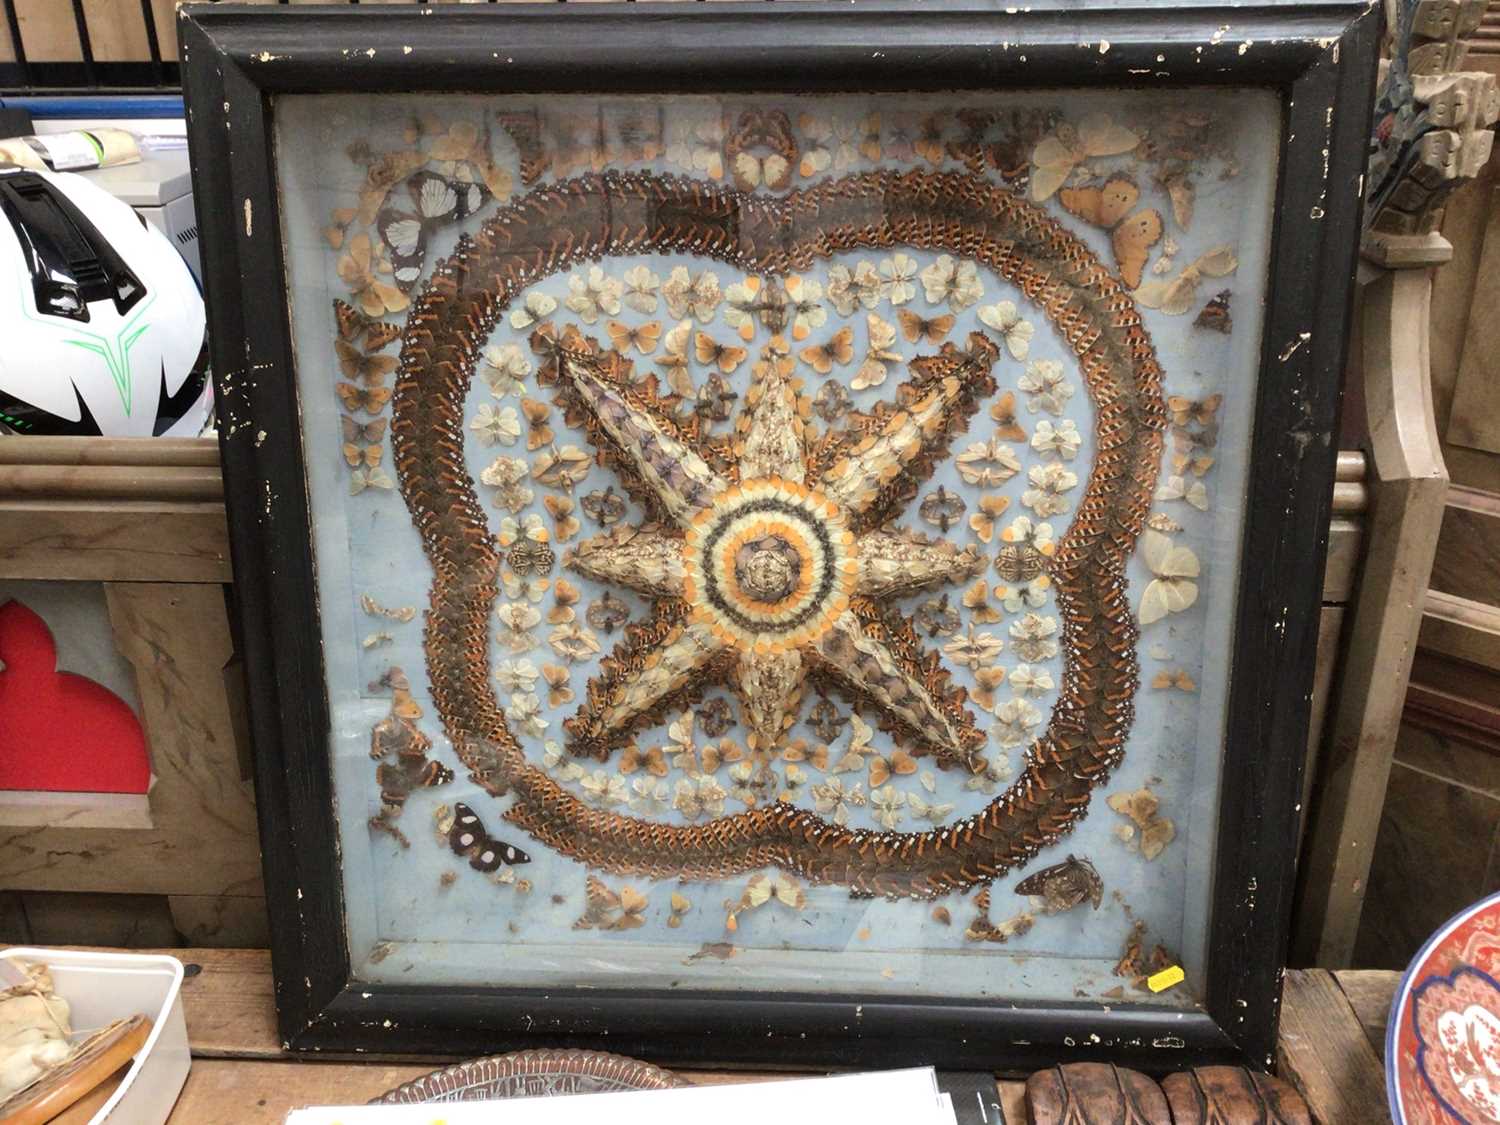 Lot 32 - Fine late Victorian display of butterflies and moths, the cantered star motif surrounded by further design, in glazed case, 73cm square 
Provenance: The Robert Barley Collection